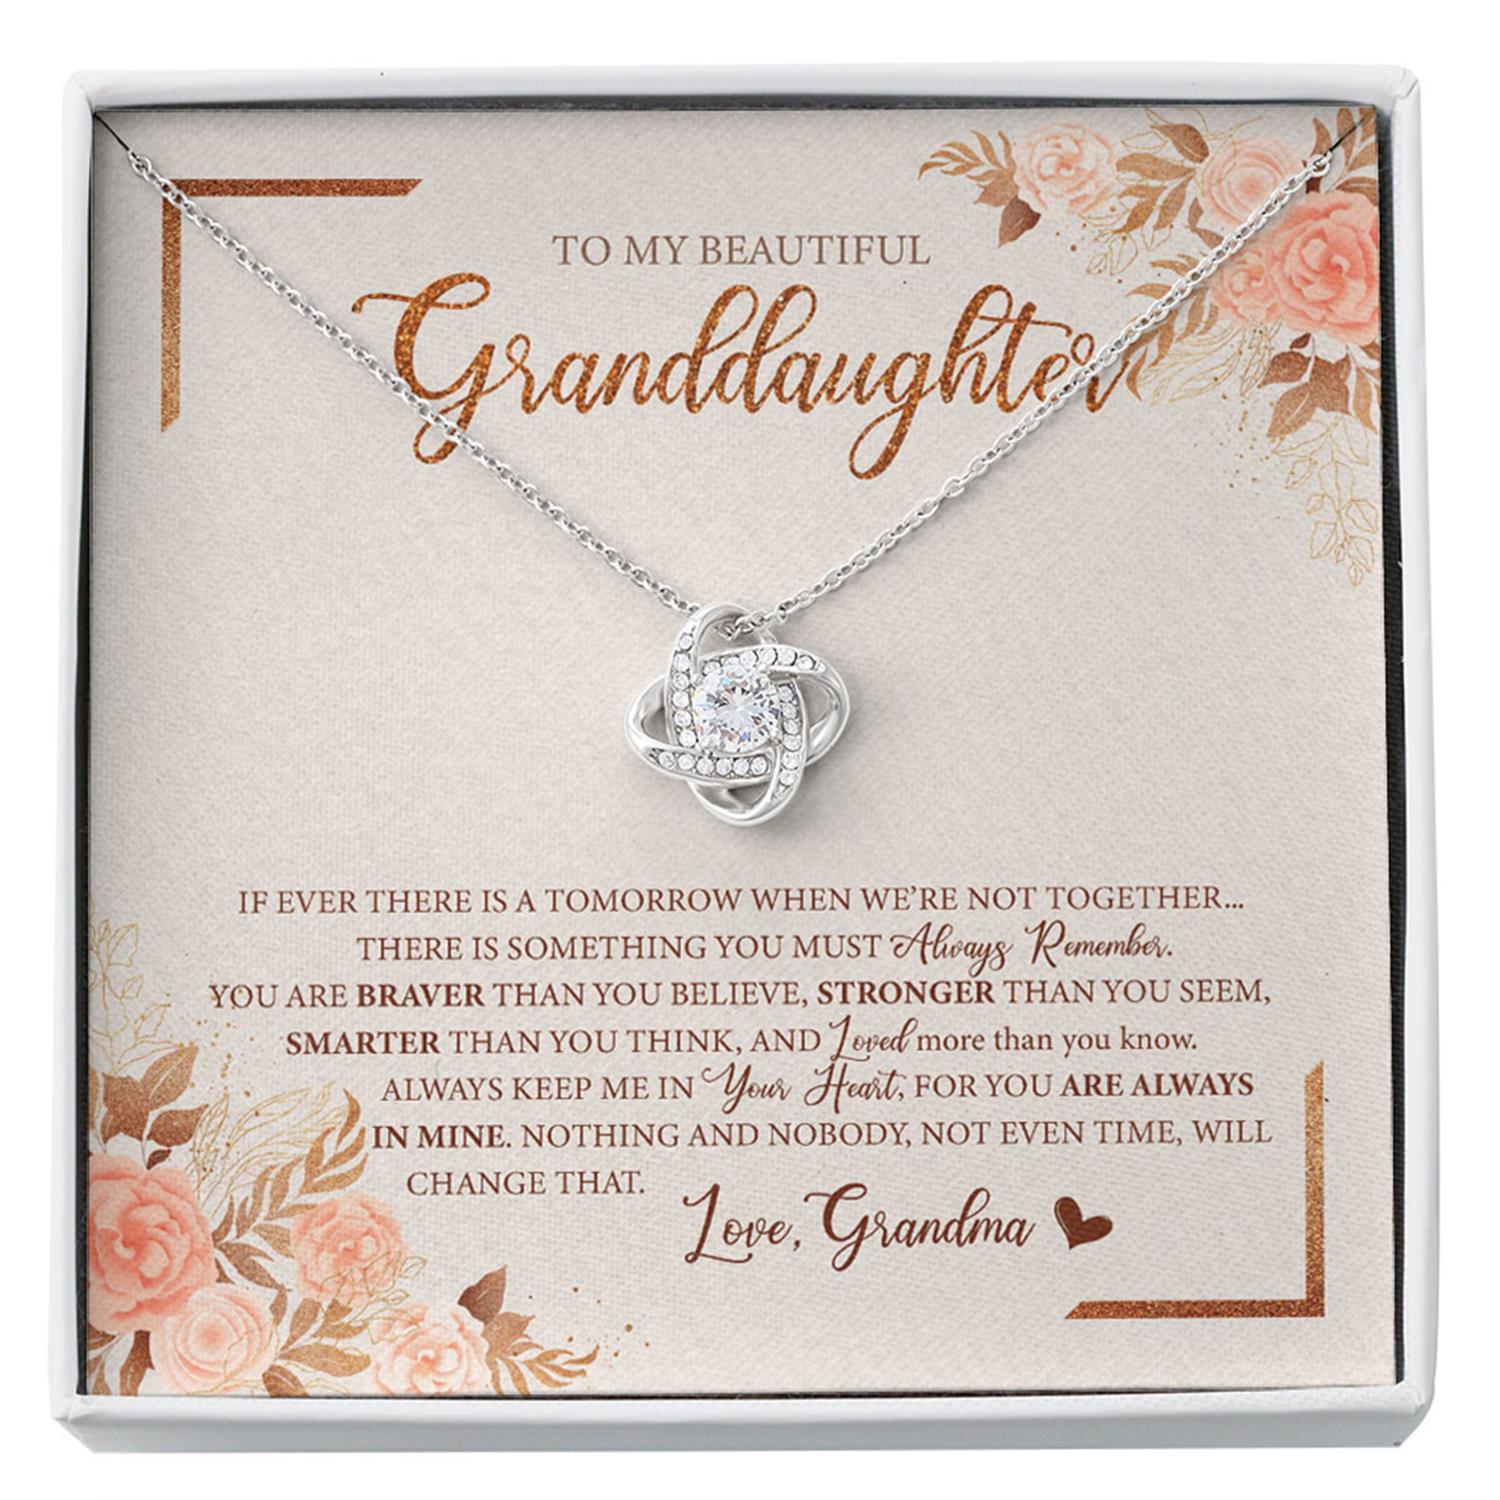 Granddaughter Necklace, To My Granddaughter Necklace, Gift For Granddaughter From Grandmother, Granddaughter Custom Necklace